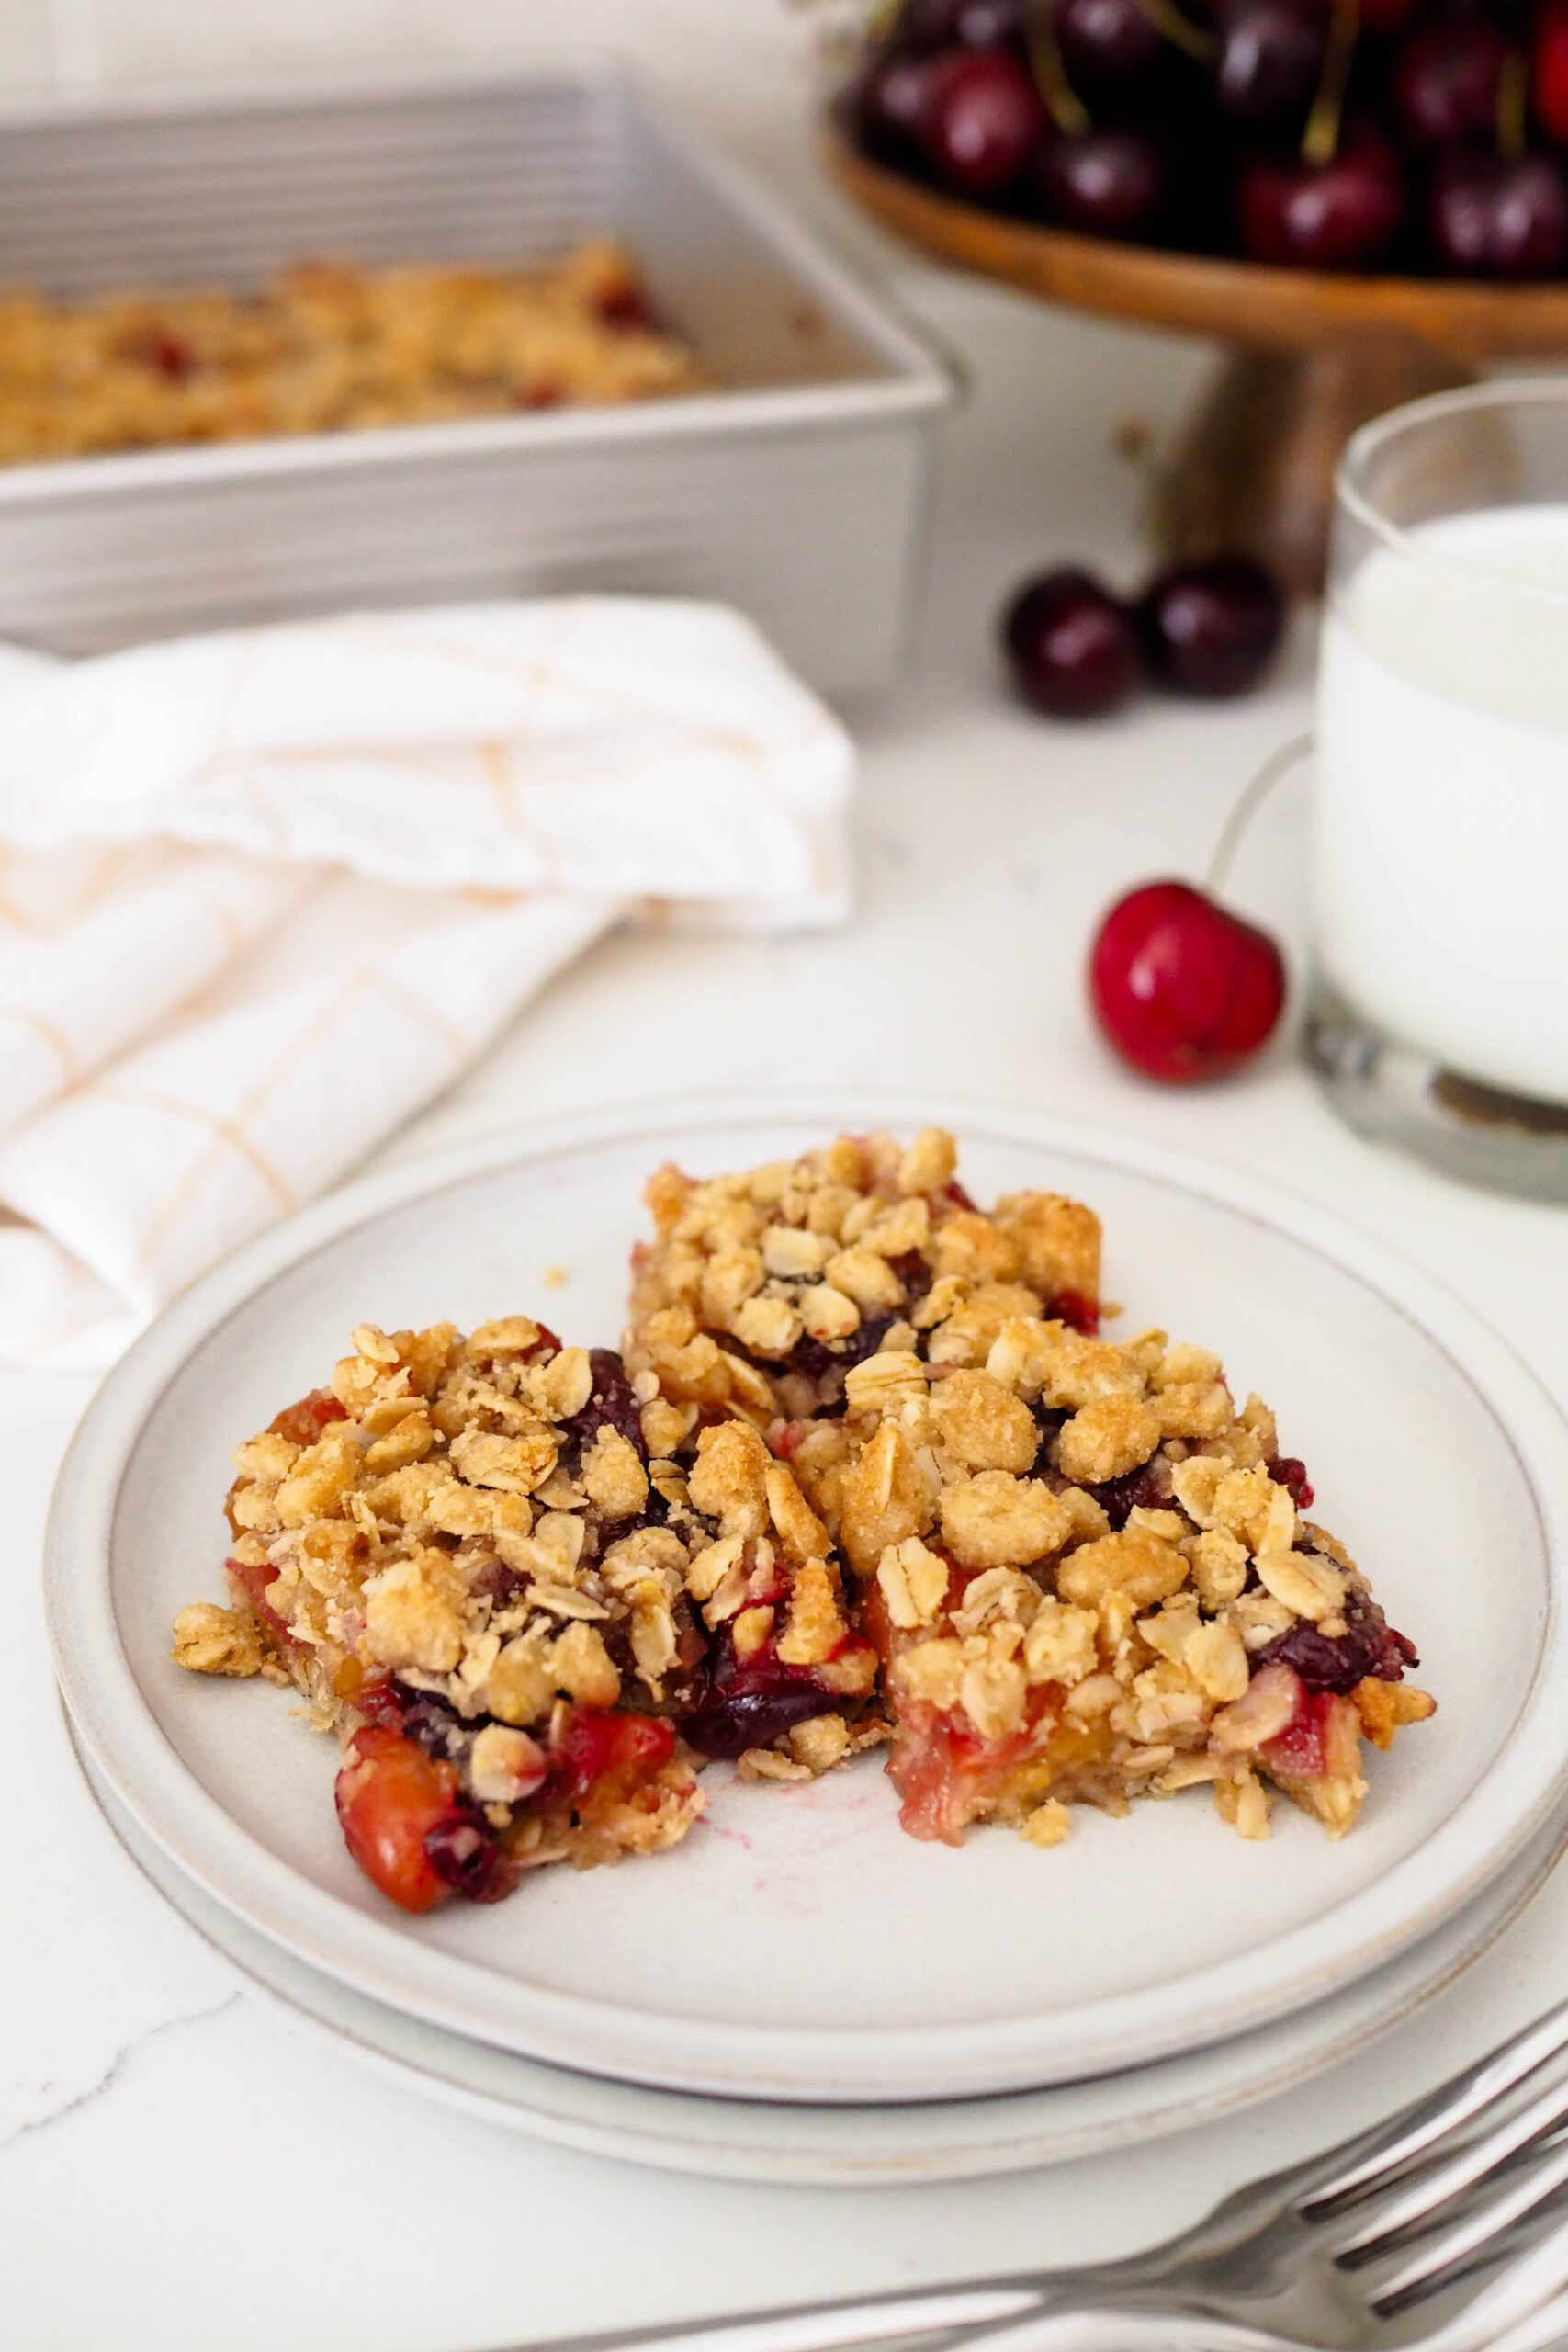 Three pieces of cherry crumble rest on a plate.